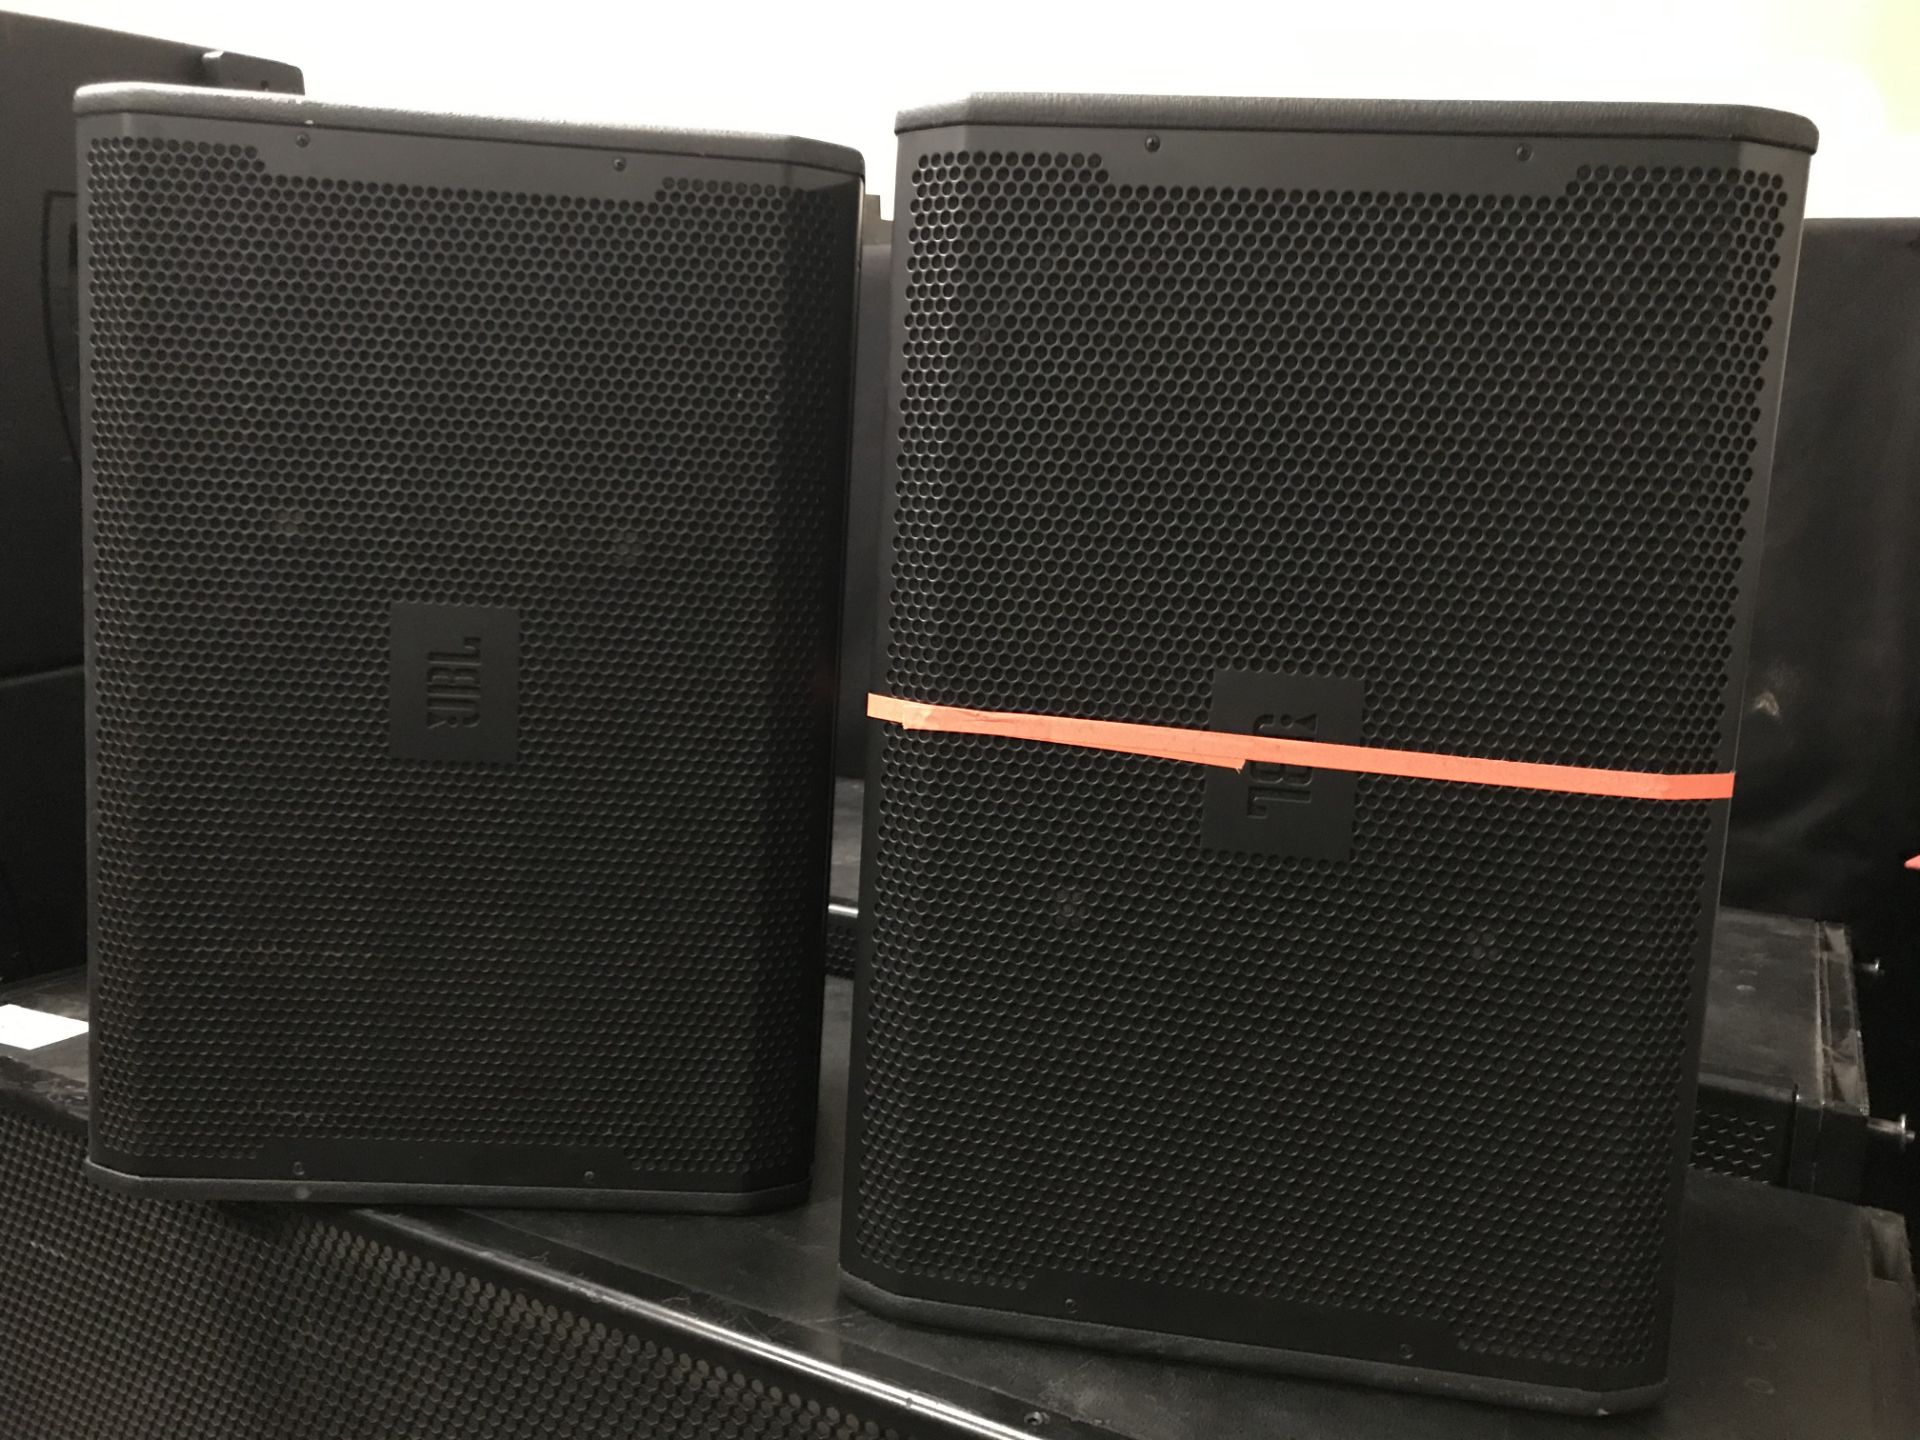 LOT OF: (2) JBL VRX 915M W/ ROLLING CASE, SN P0563-32071/ P0563-31526 - Image 2 of 4